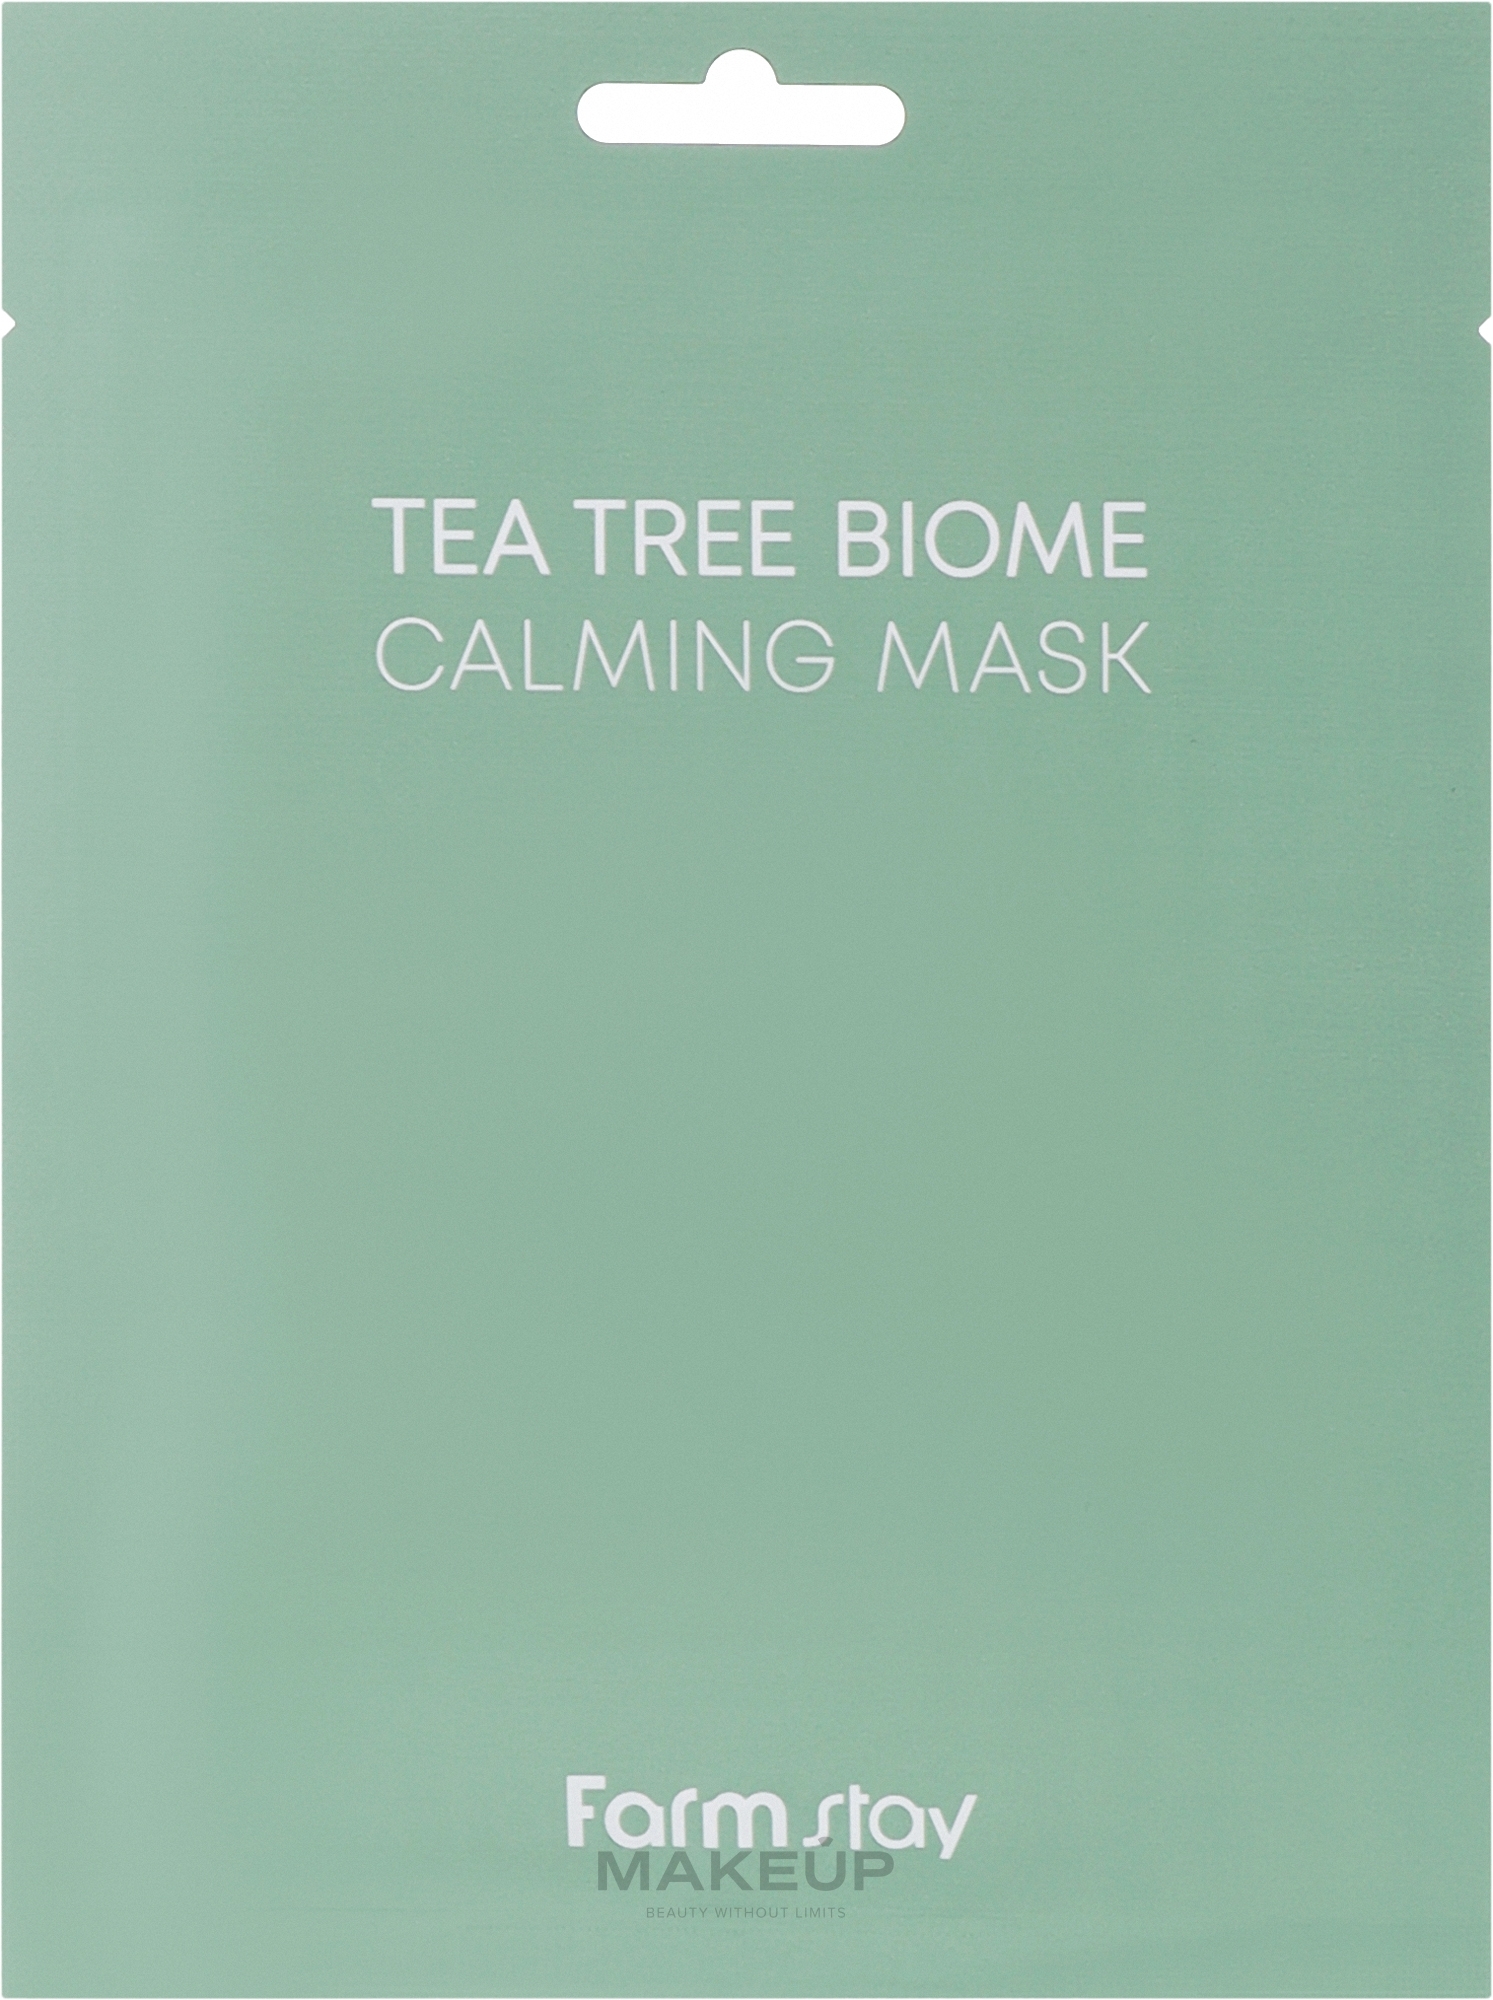 Soothing Mask with Tea Tree Extract - FarmStay Tea Tree Biome Calming Mask — photo 25 ml